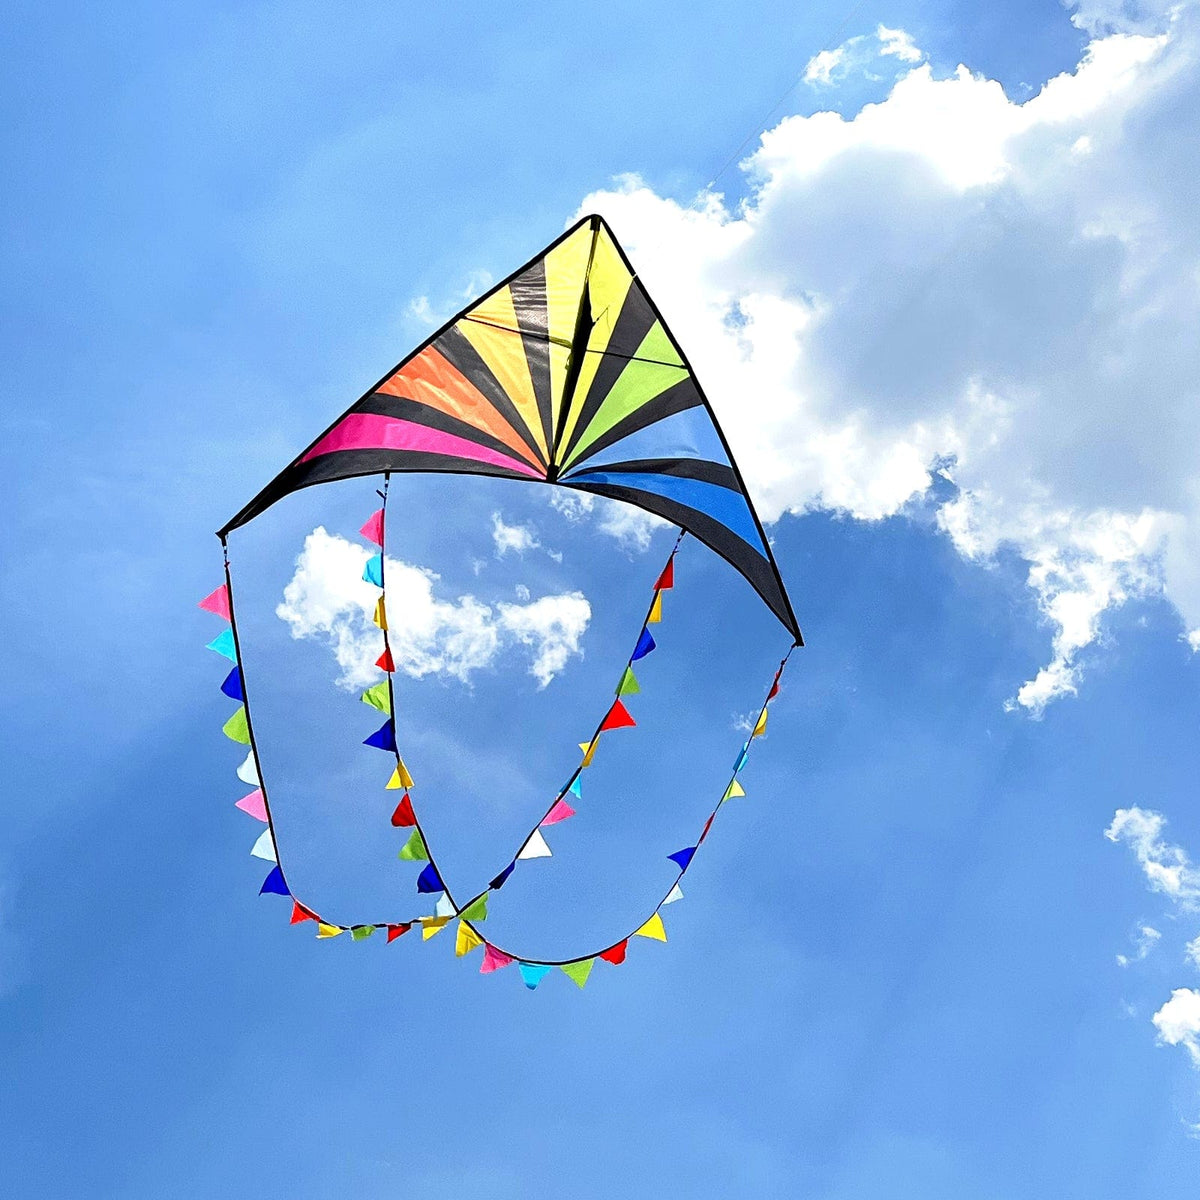 http://mintscolorfullife.com/cdn/shop/products/simxkai-large-rainbow-delta-kite-for-kids-adults-easy-to-fly-50132665363-kangyue-41490667503768_1200x1200.jpg?v=1676965506